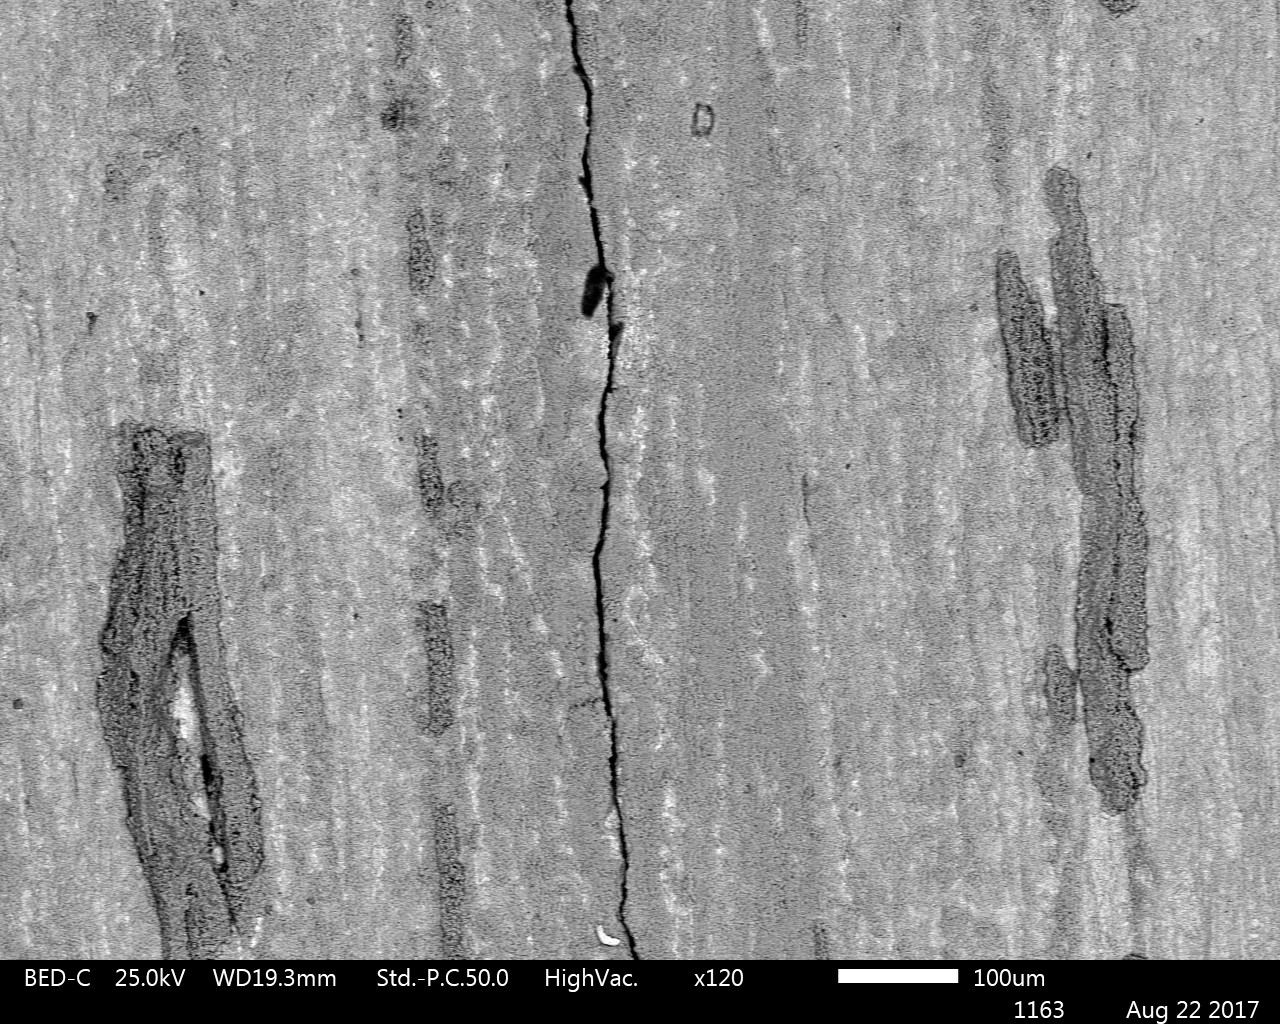 Backscatter image showing a crack and surface scale